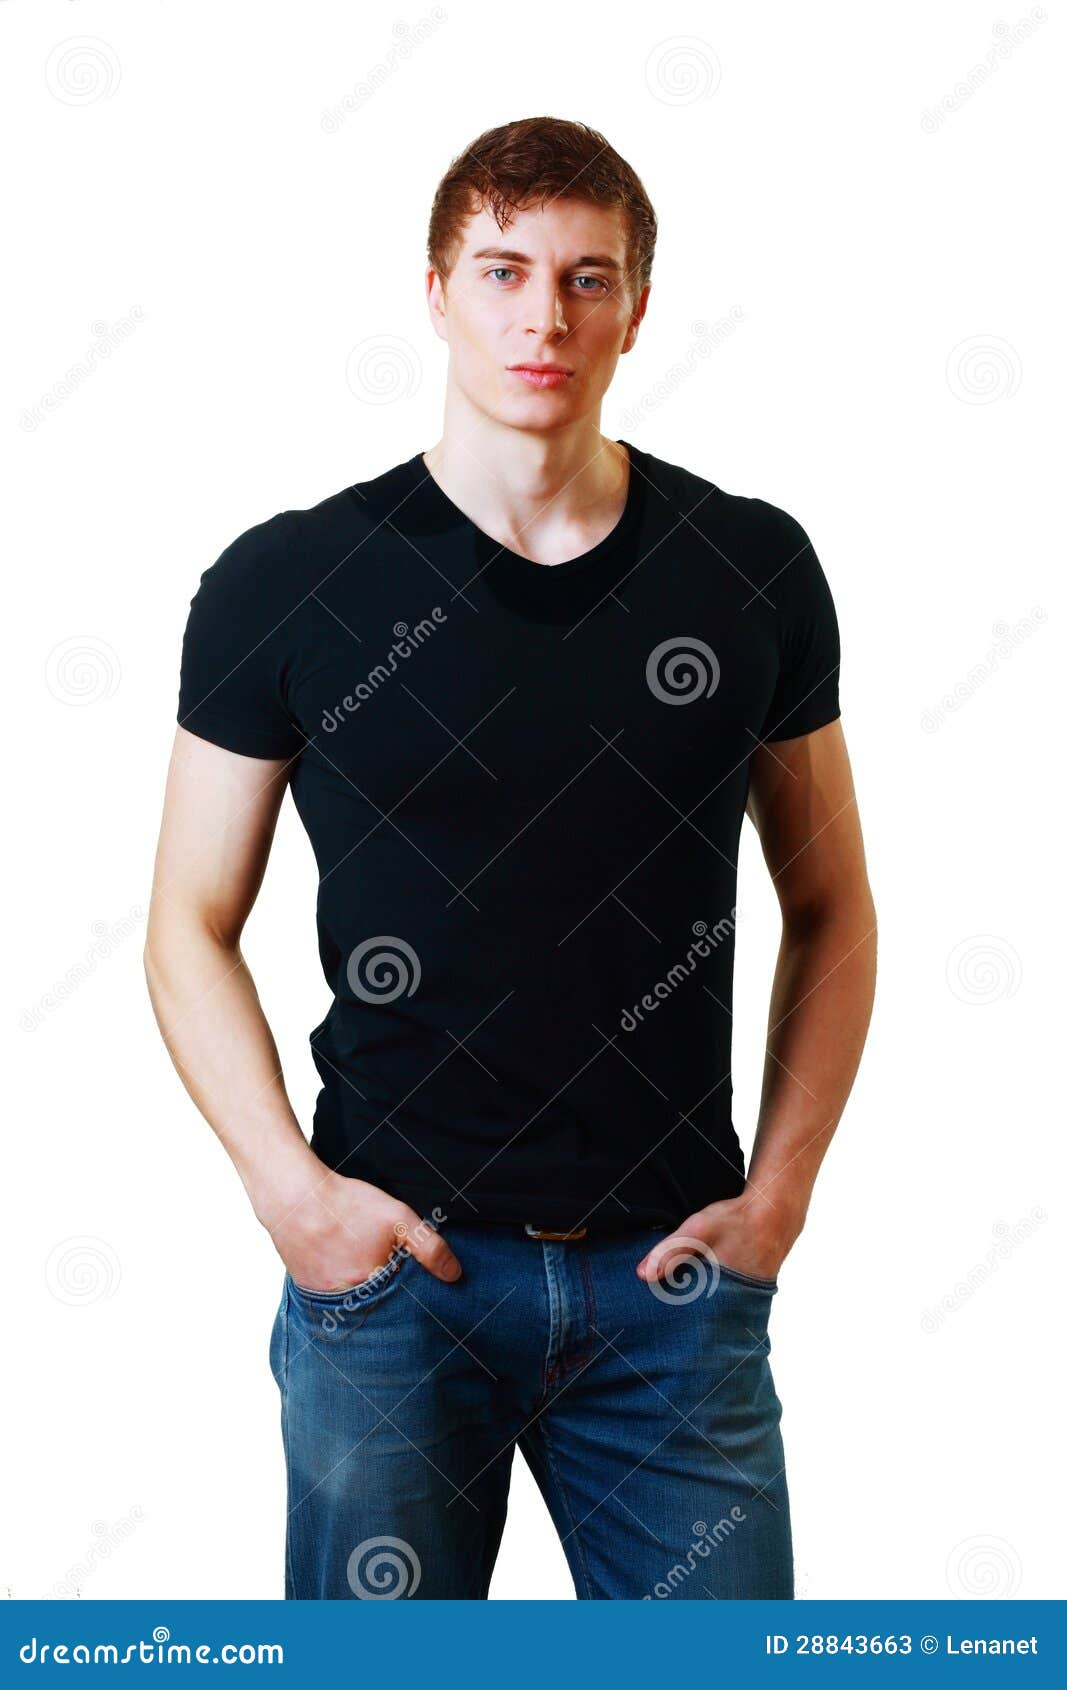 Handsome athletic man stock image. Image of professional - 28843663